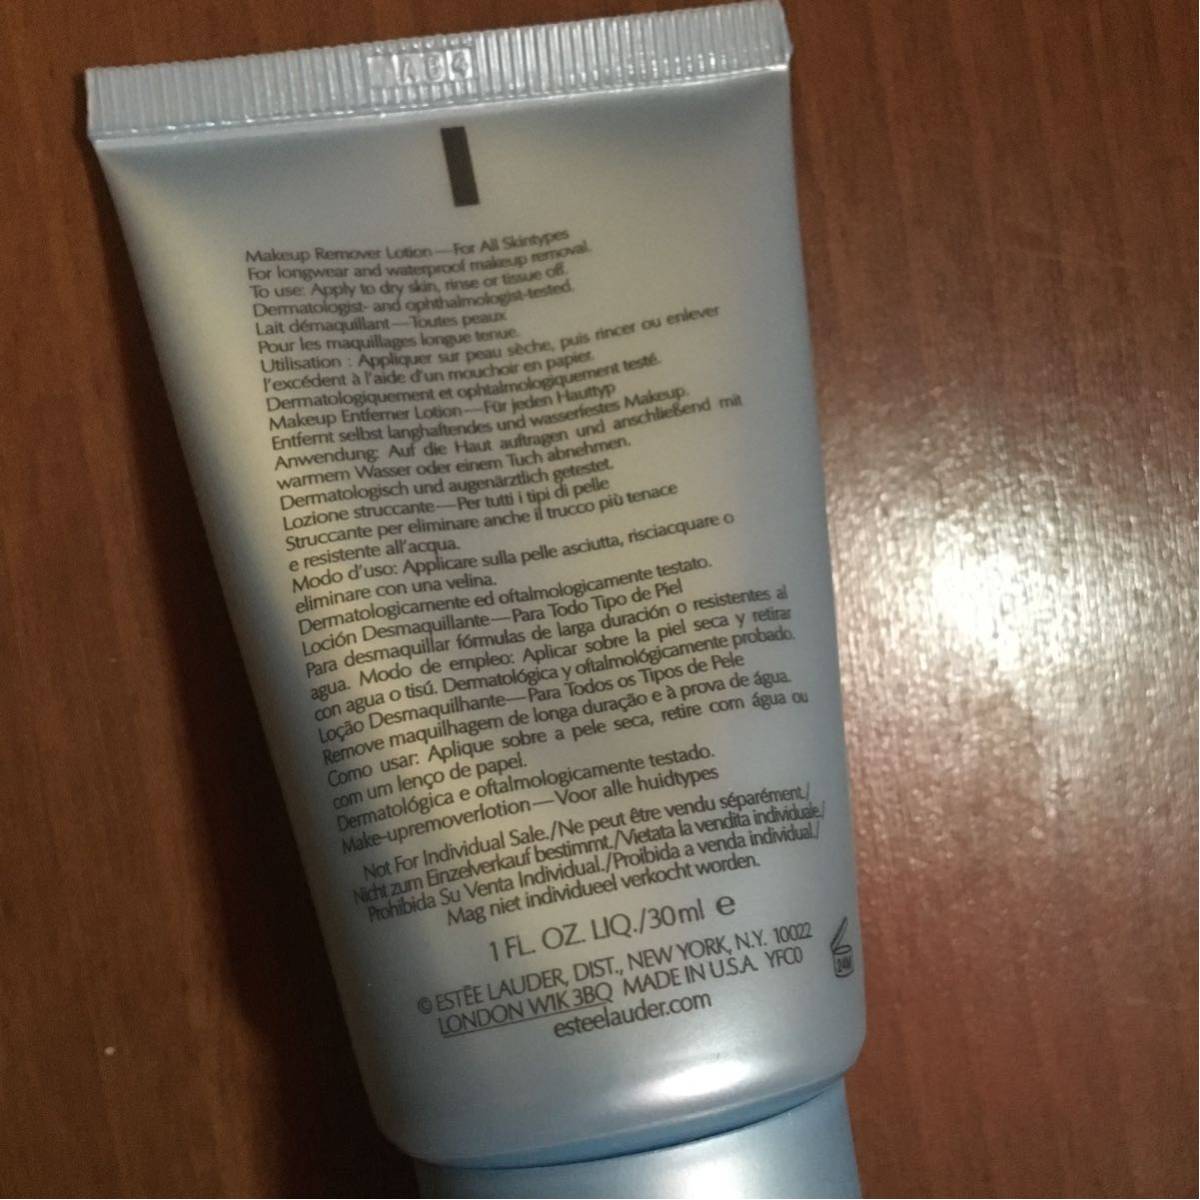 Estee Lauder Take itoa way me-k up remover lotion 30ml cleansing 